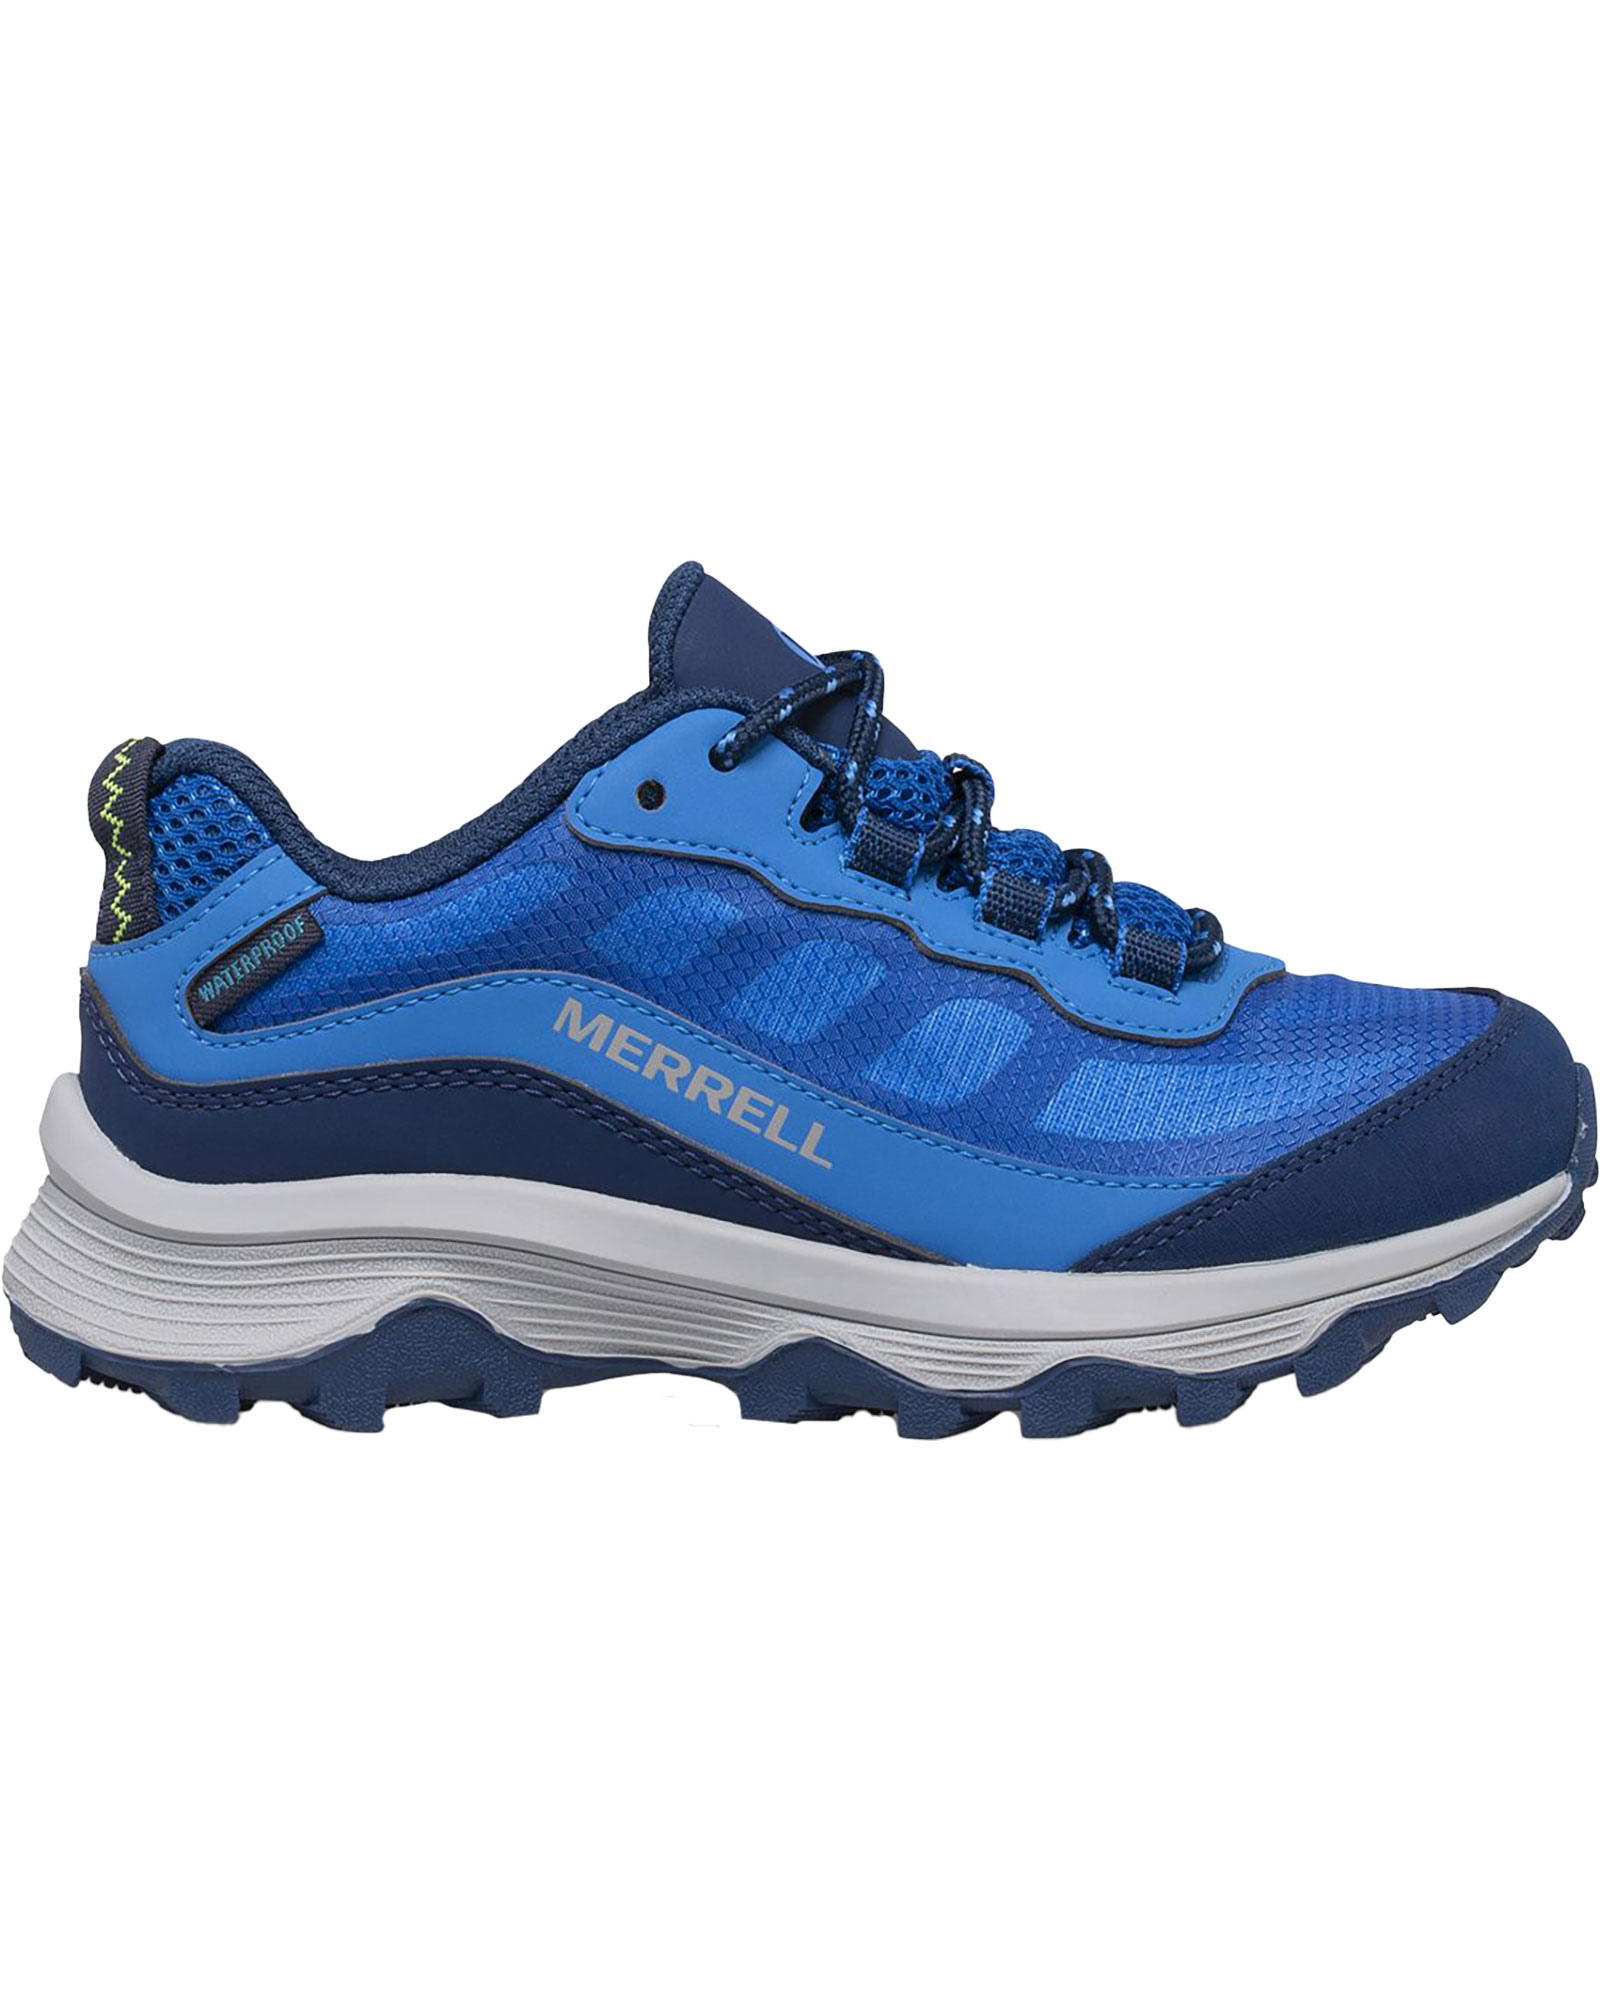 Merrell Moab Speed Laces Kids’ Waterproof Shoes - Blue/Berry/Turquoise UK 5